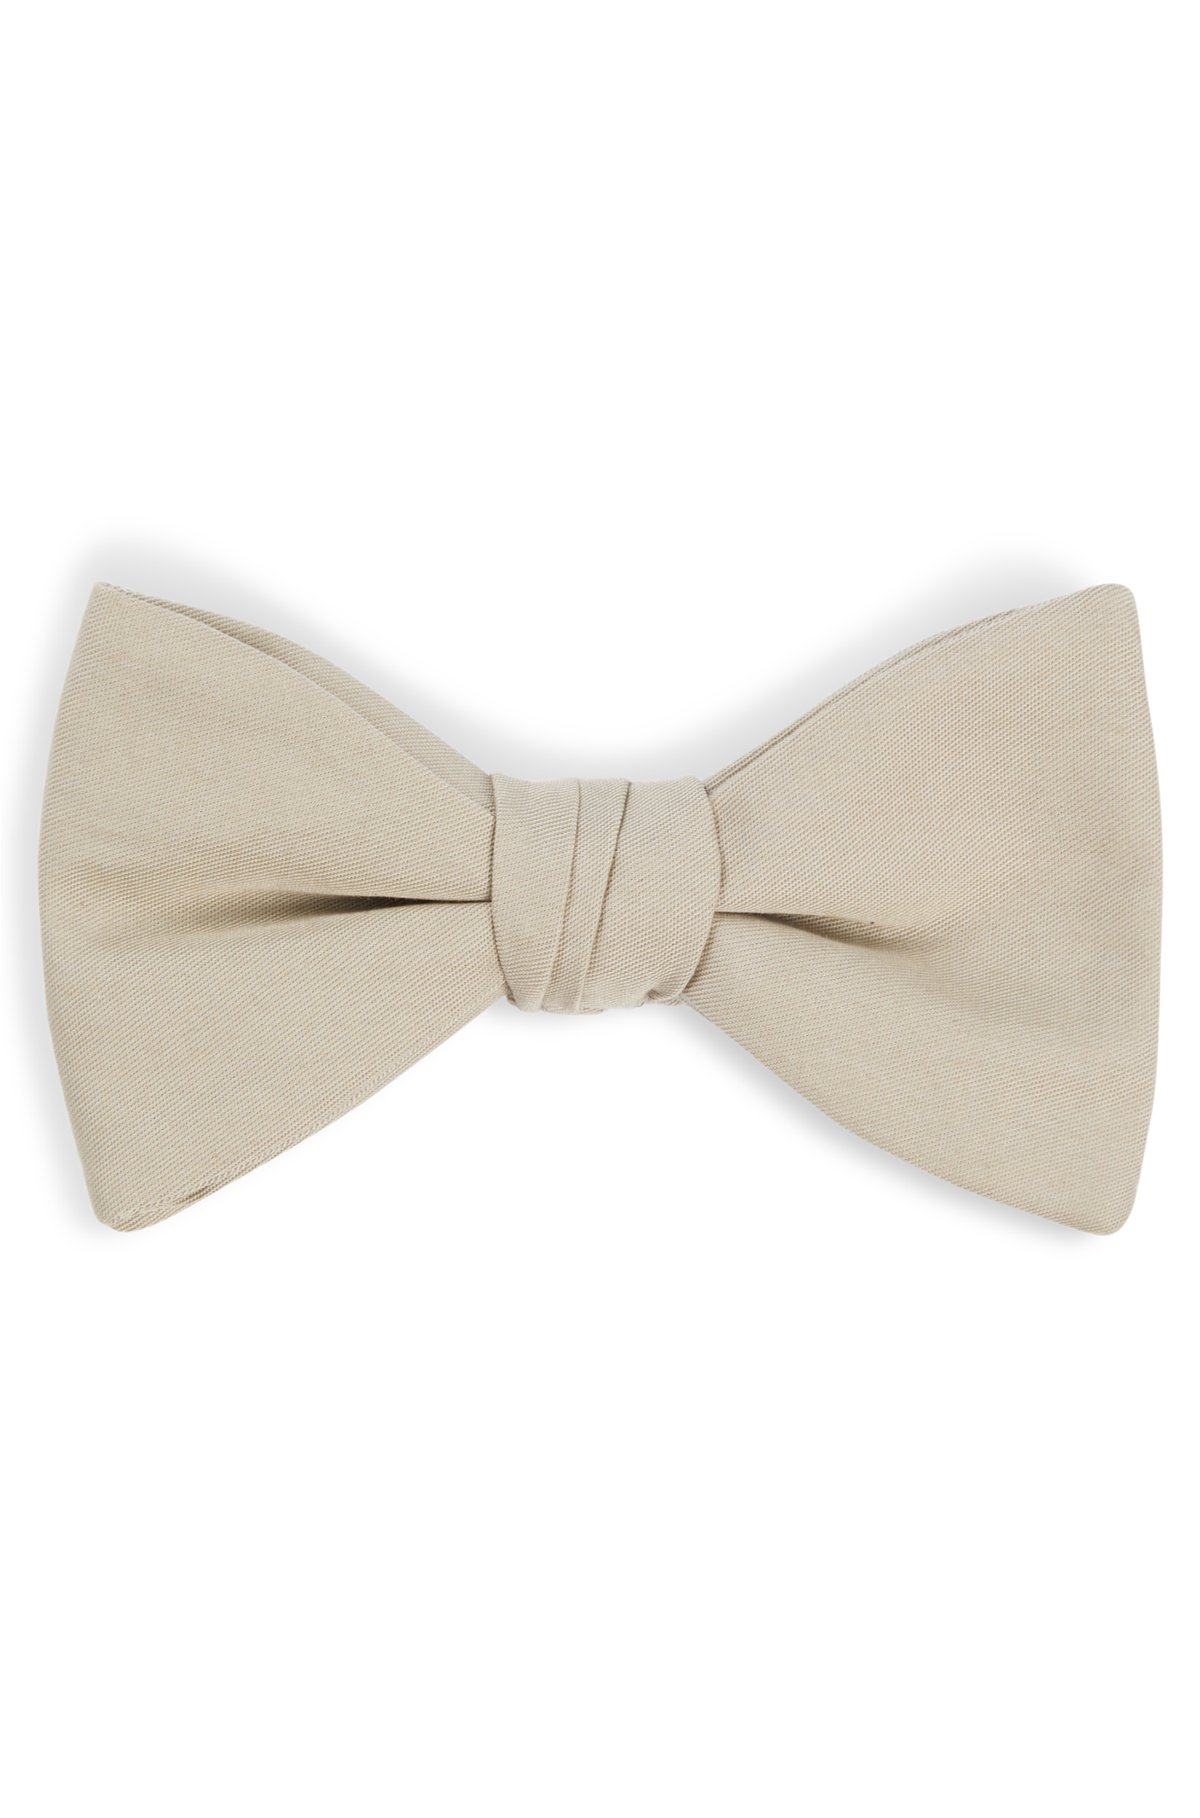 Bow tie in cotton jacquard, Light Grey